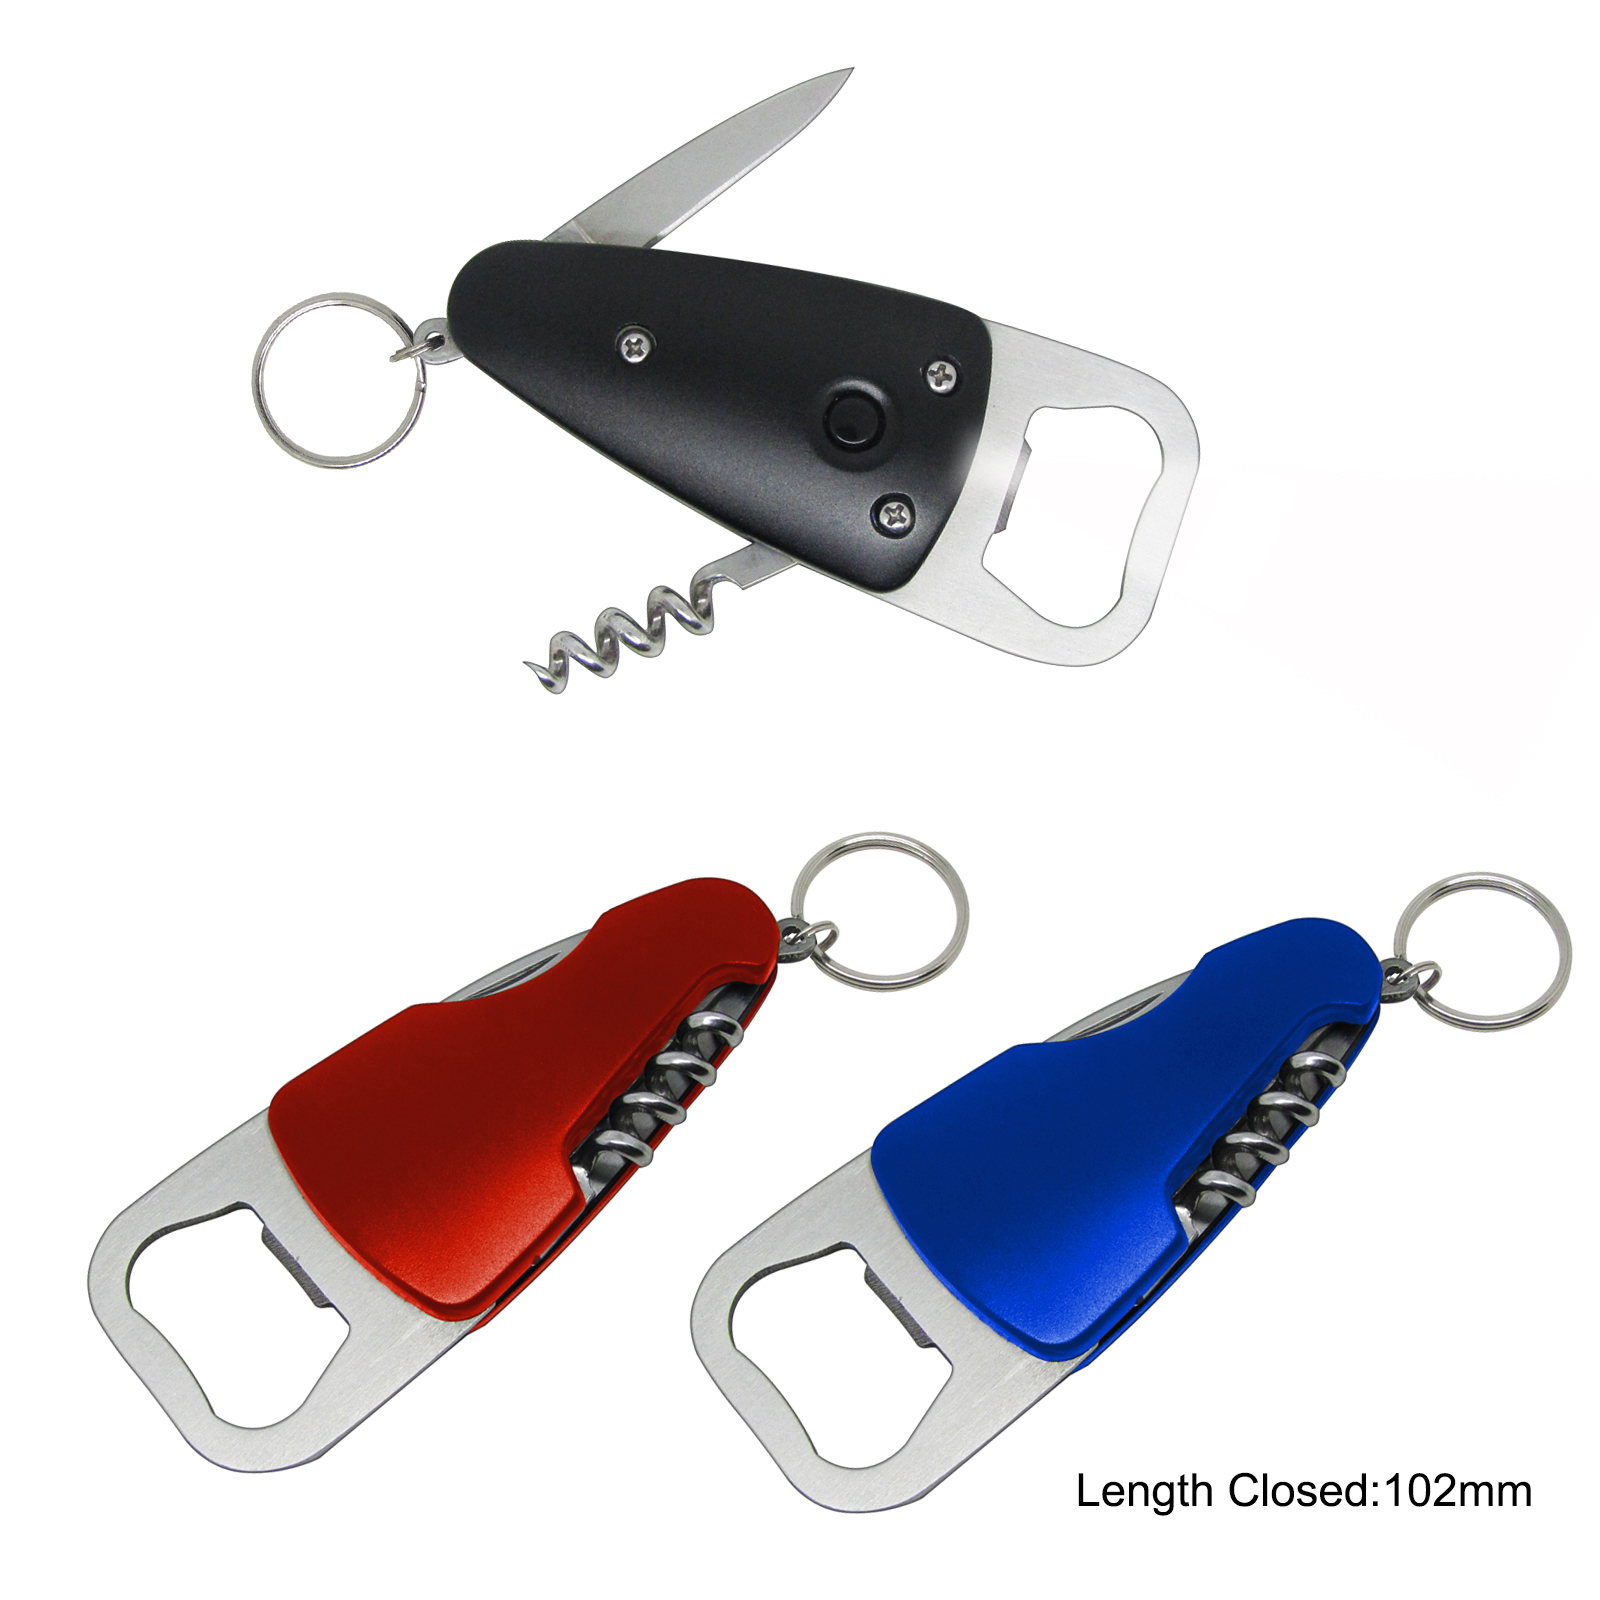 #6180 Multi Function Key Chain Tools with LED Torch 